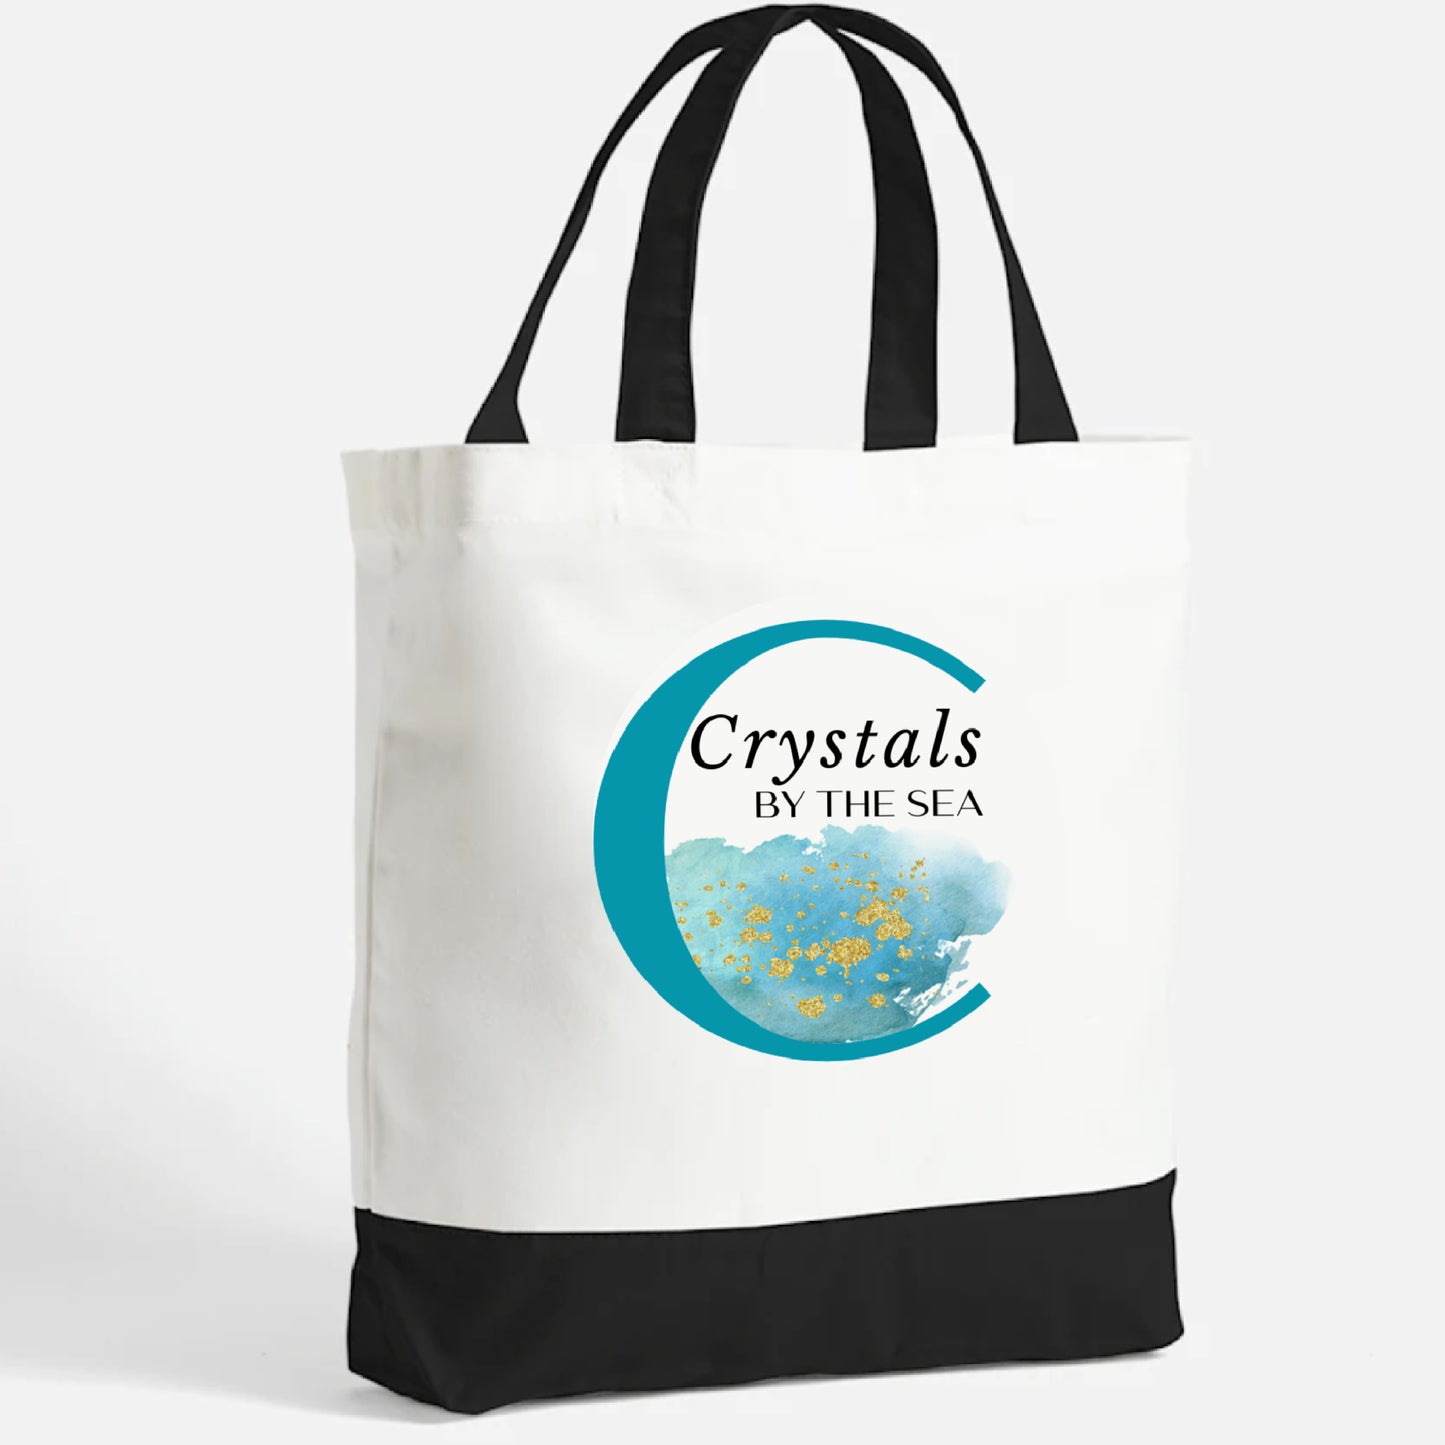 Crystals by the Sea LARGE Black & Off White Canvas Tote Bag: Carry Your Intentions in Style